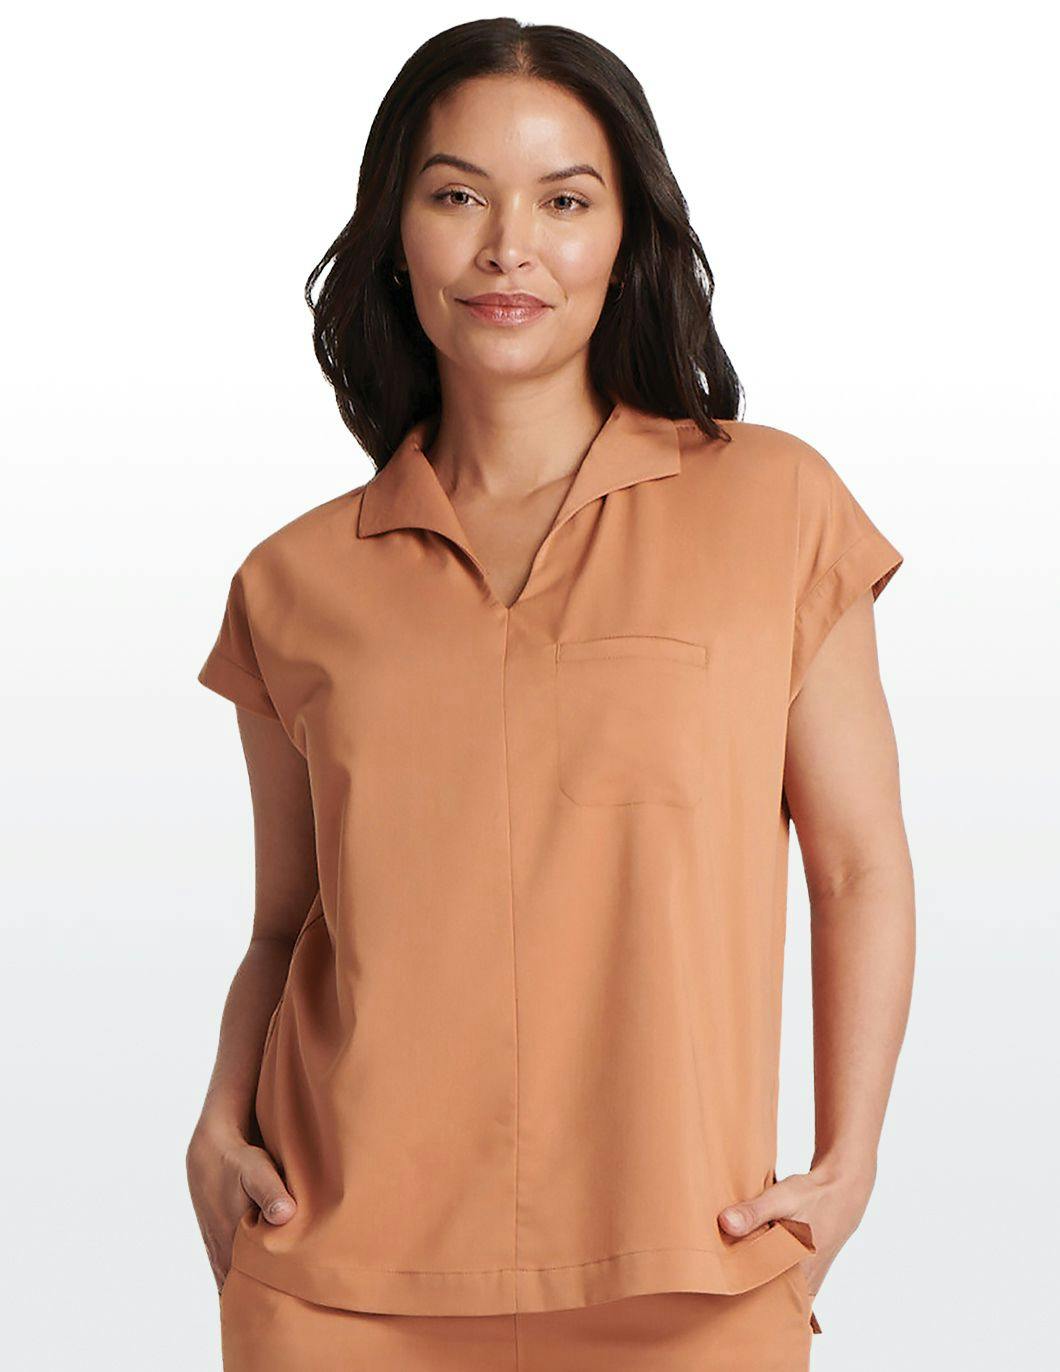 Healing-Hands-Limited-Edition-Scrub-Top-Front